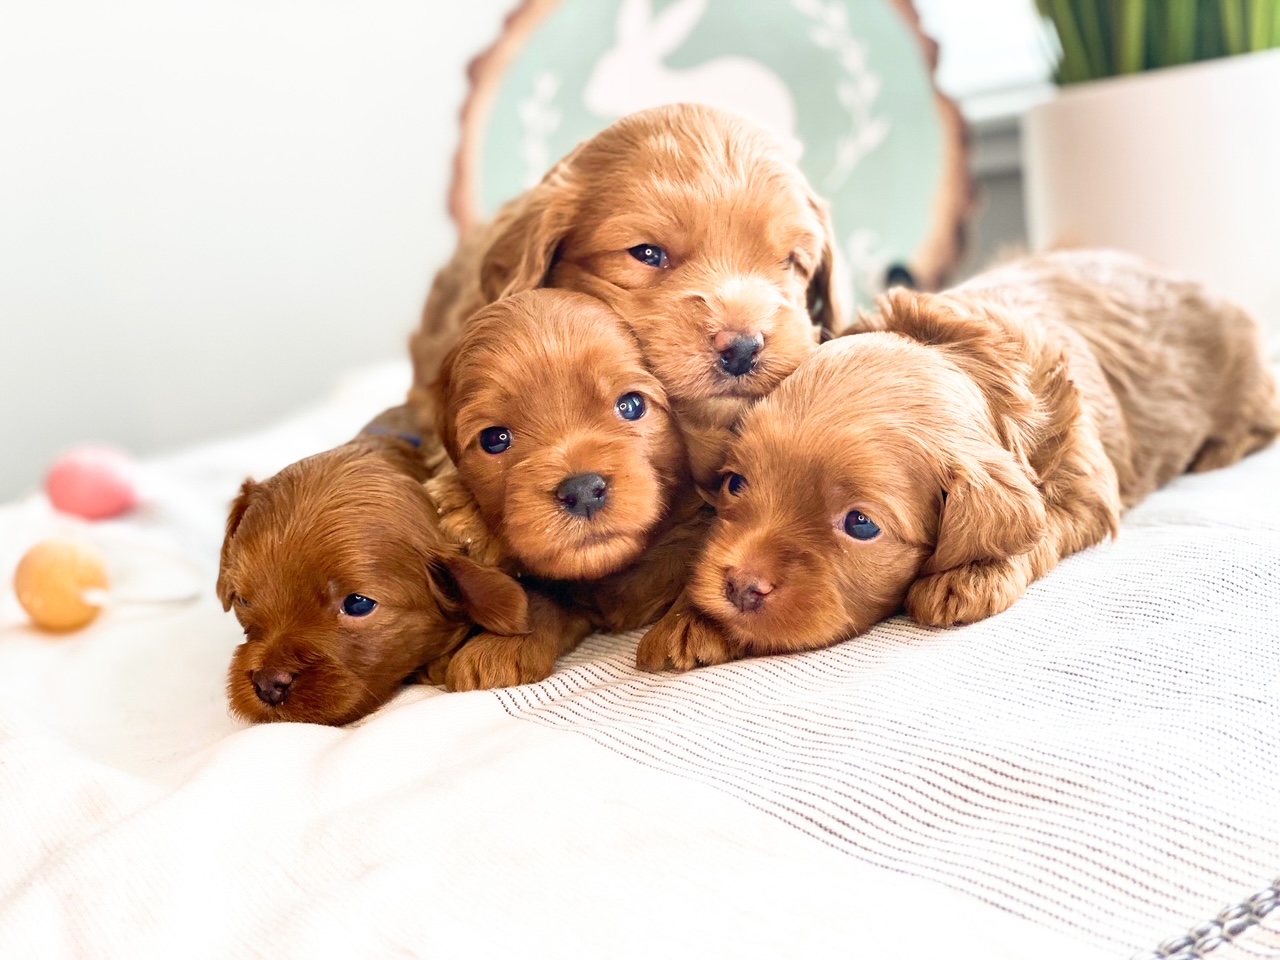 Four adorable puppies peacefully stacked on one another, showcasing their irresistible charm and creating a heartwarming sight.